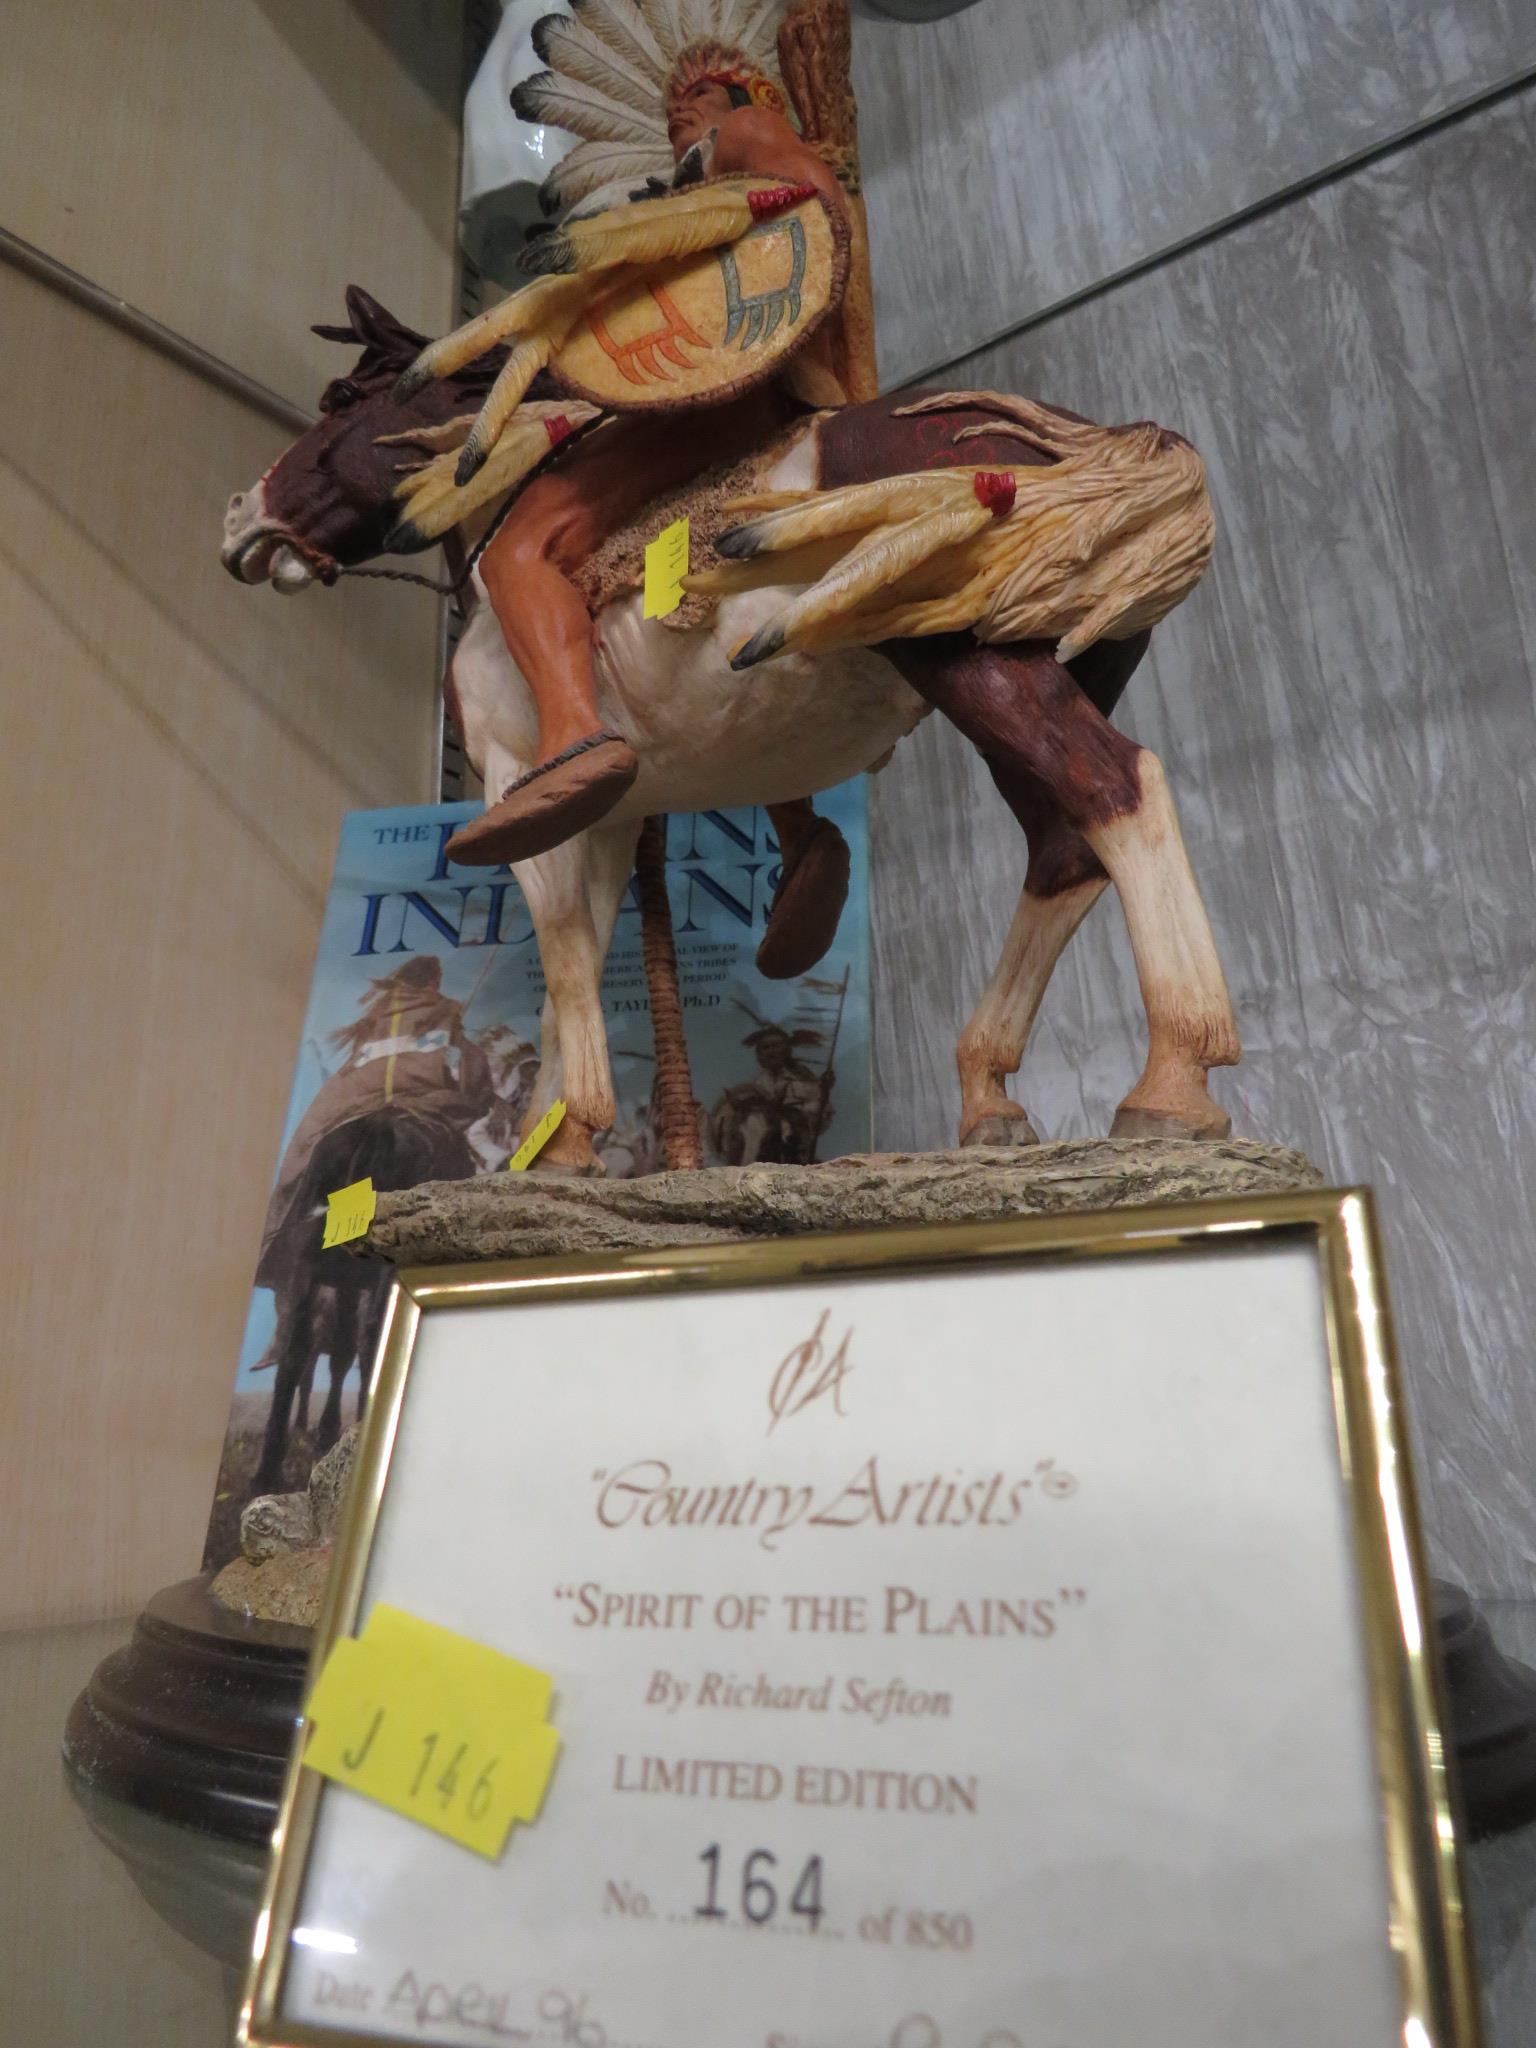 Country Artist figure 'Spirit of the plains' by Richard Sefton, limited edition number 164 of 850, - Image 2 of 2